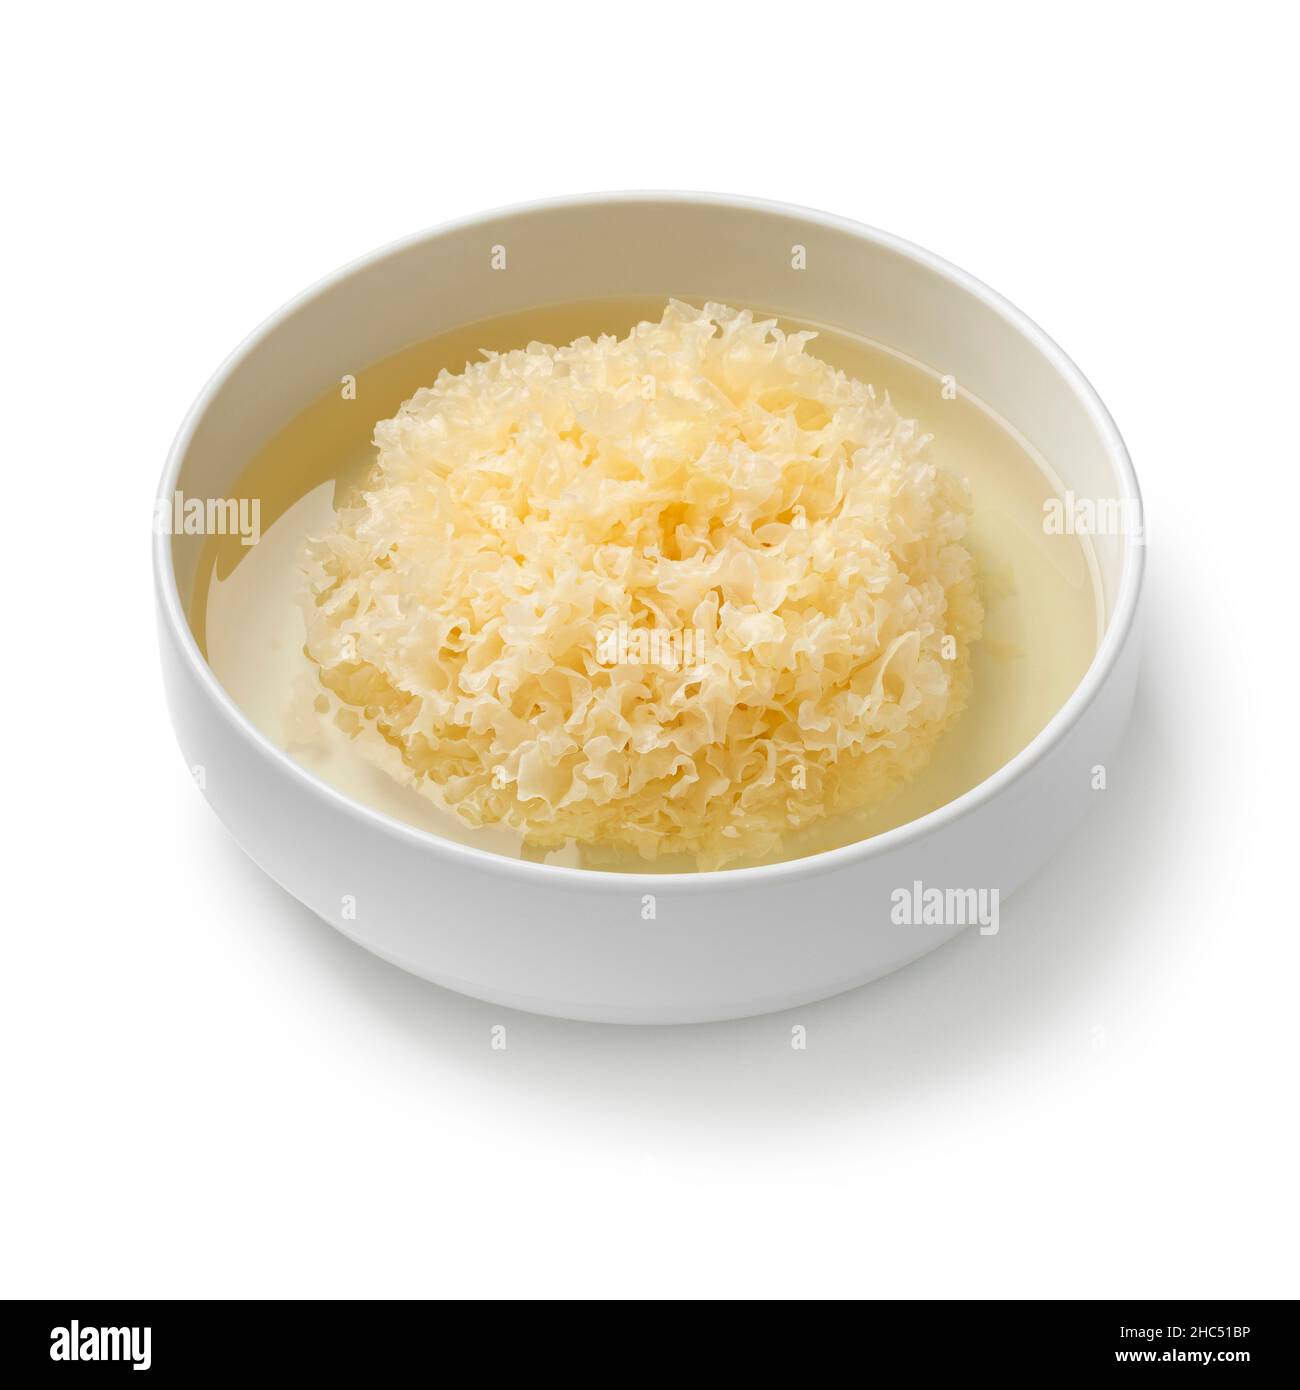 Soaking a whole dried white fungus in water in a bowl close up isolated on white background Stock Photo